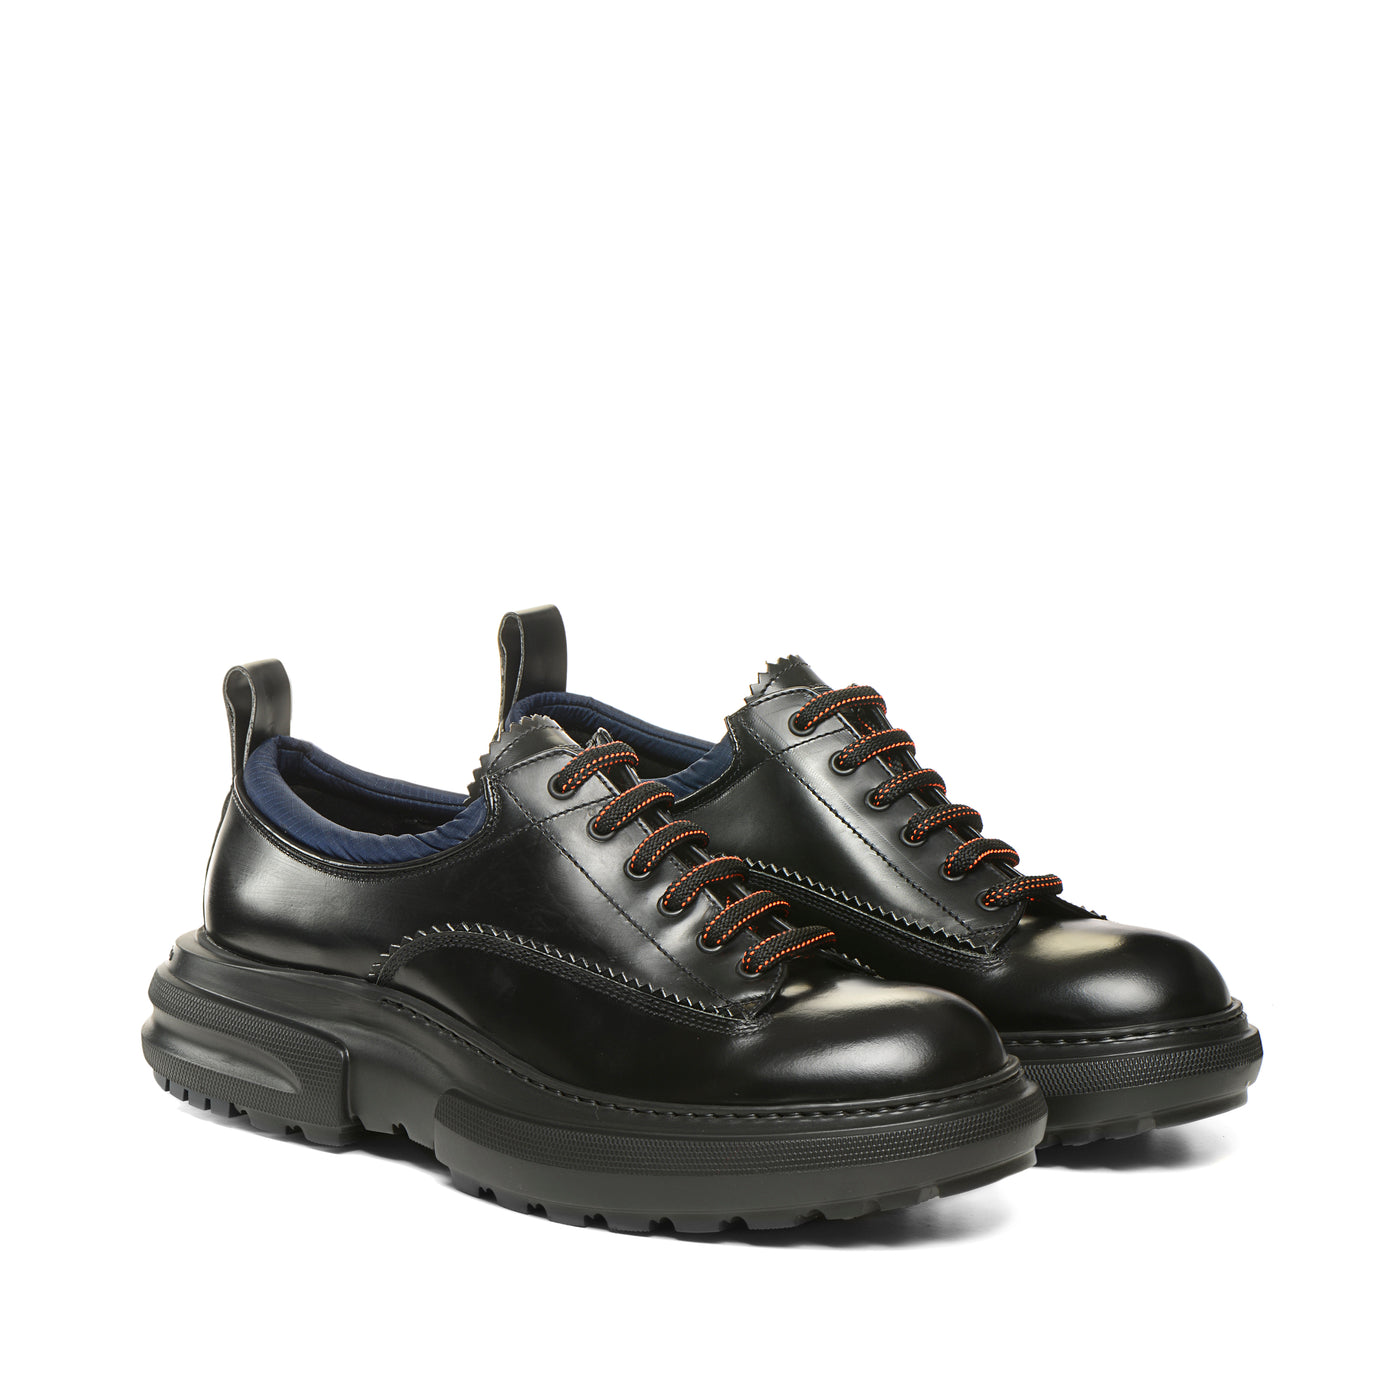 Shop The Latest Collection Of Fratelli Rossetti Man Leather Lace-Up 46470 In Lebanon